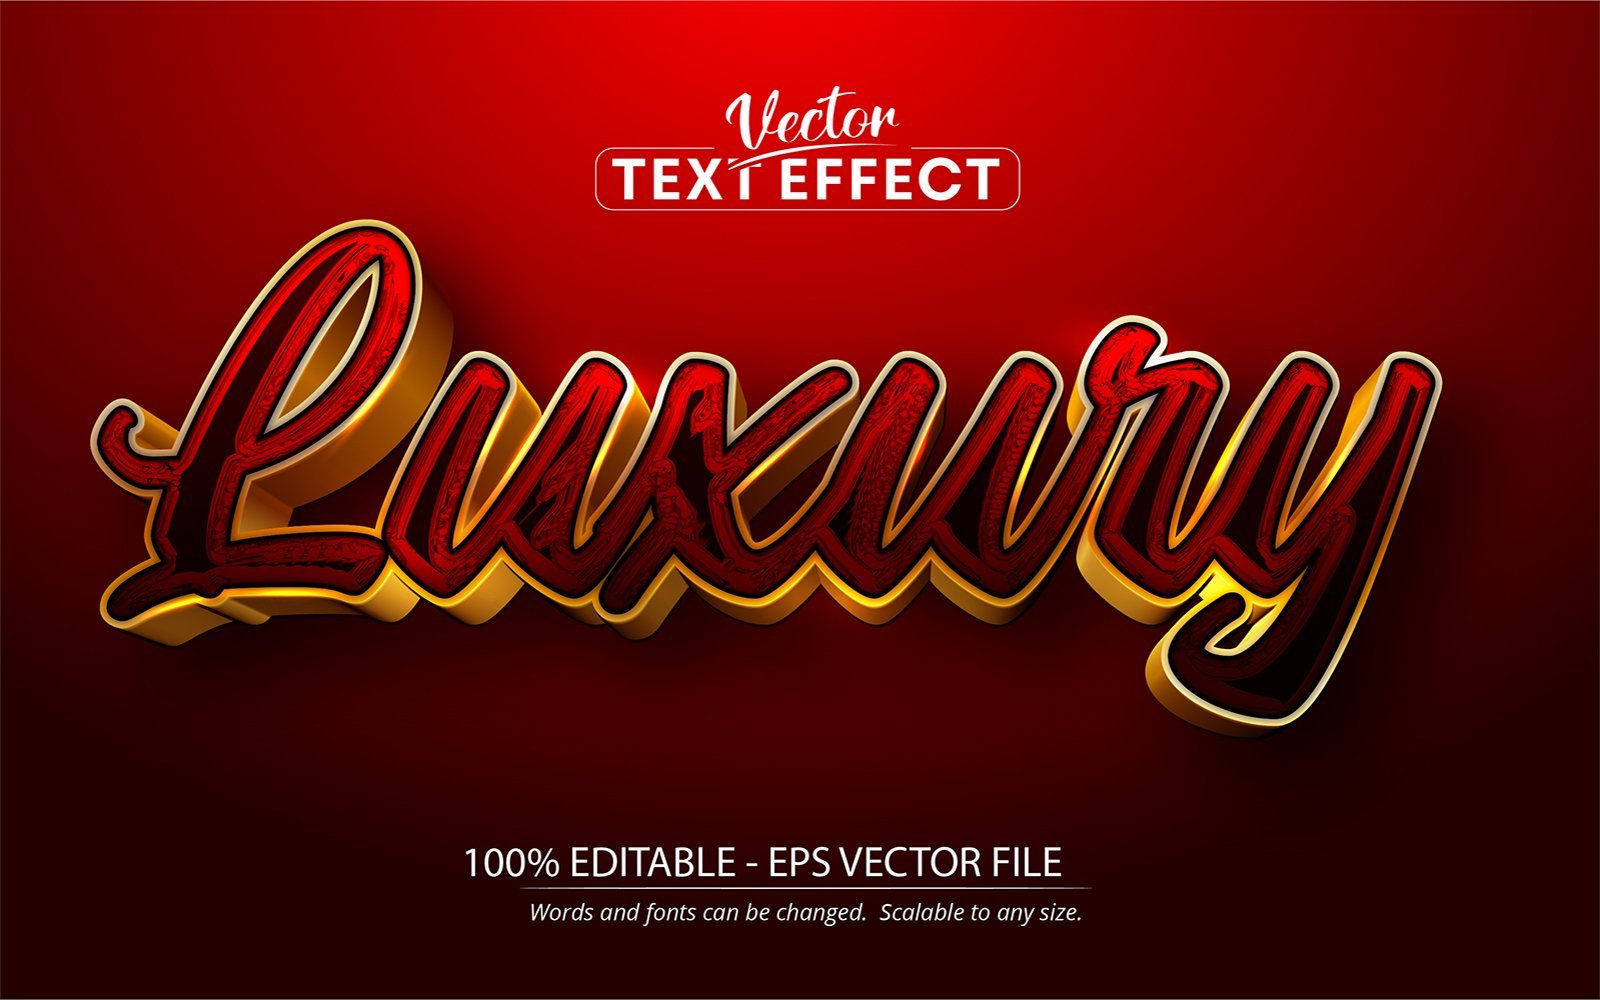 Luxury - Editable Text Effect, Shiny Gold And Red Text Style, Graphics Illustration